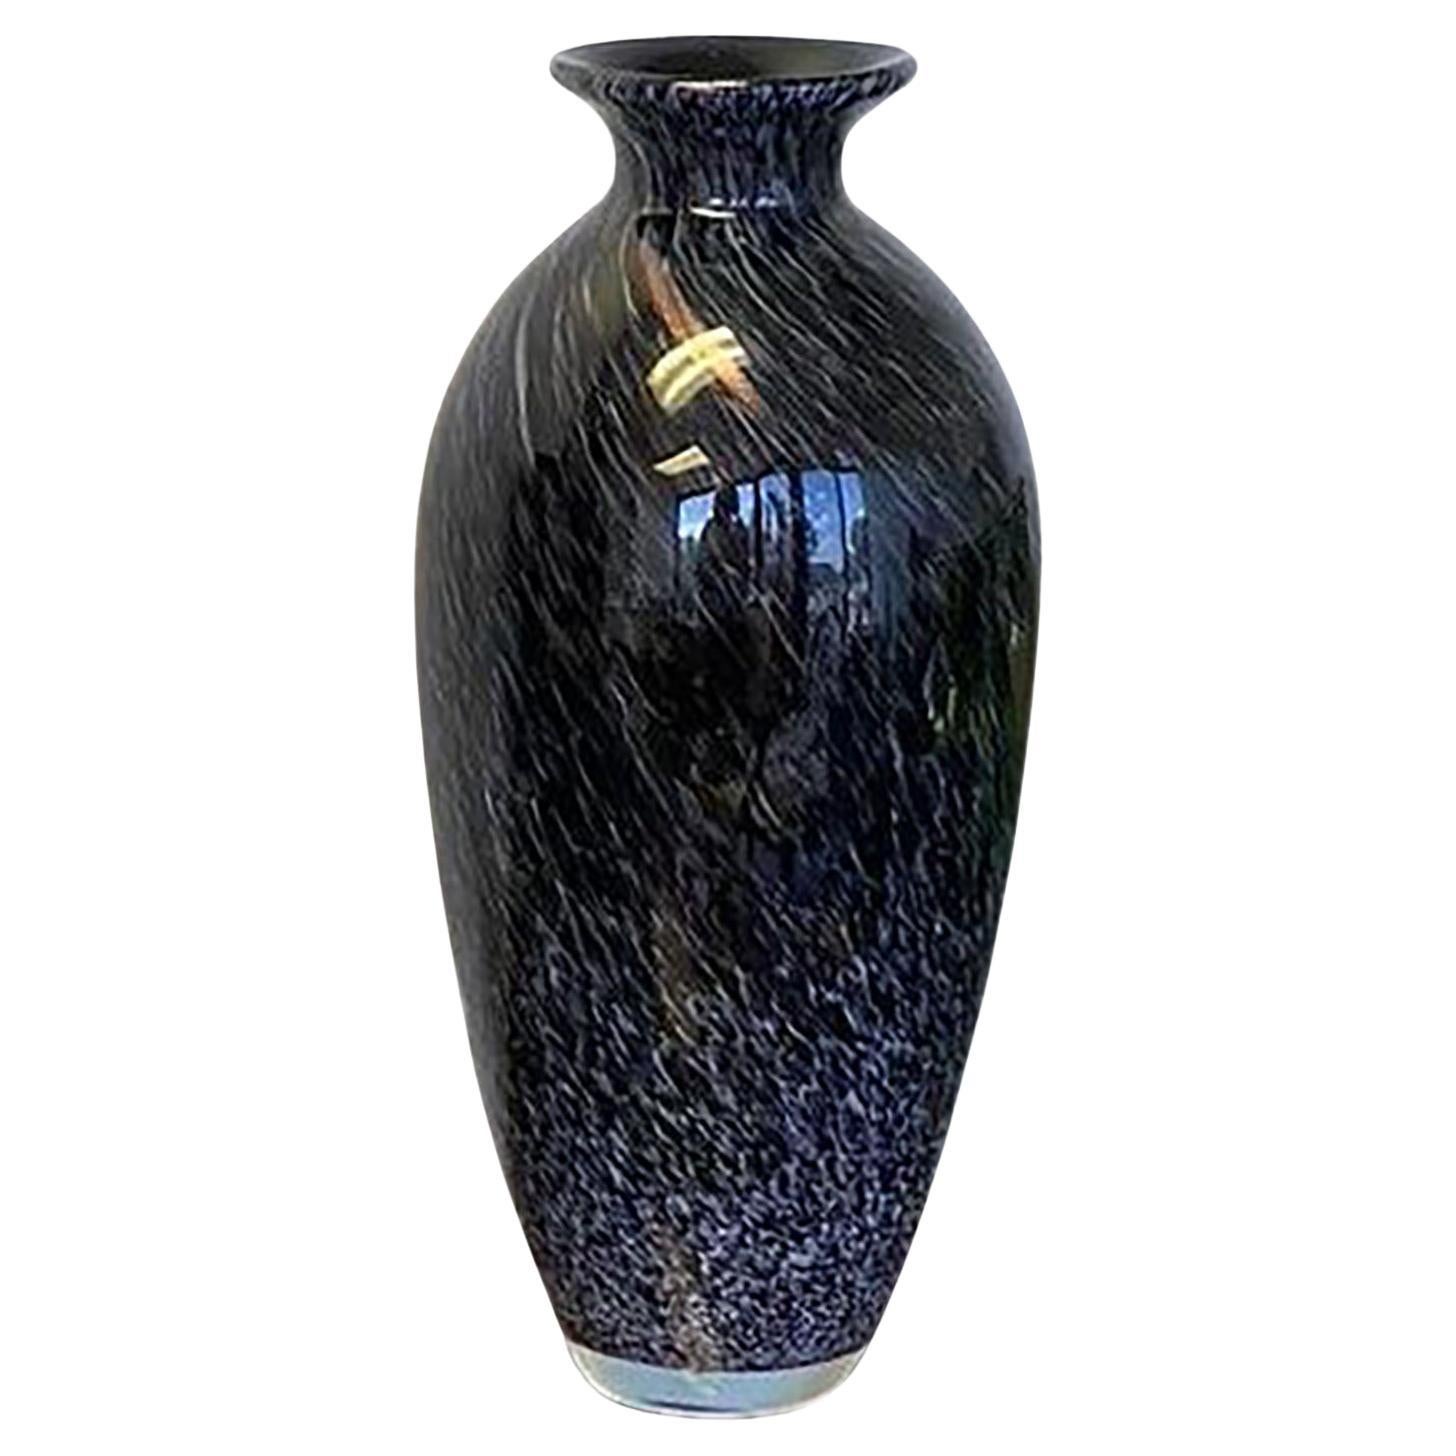 Murano Black Silver and Gold Art Glass Vase